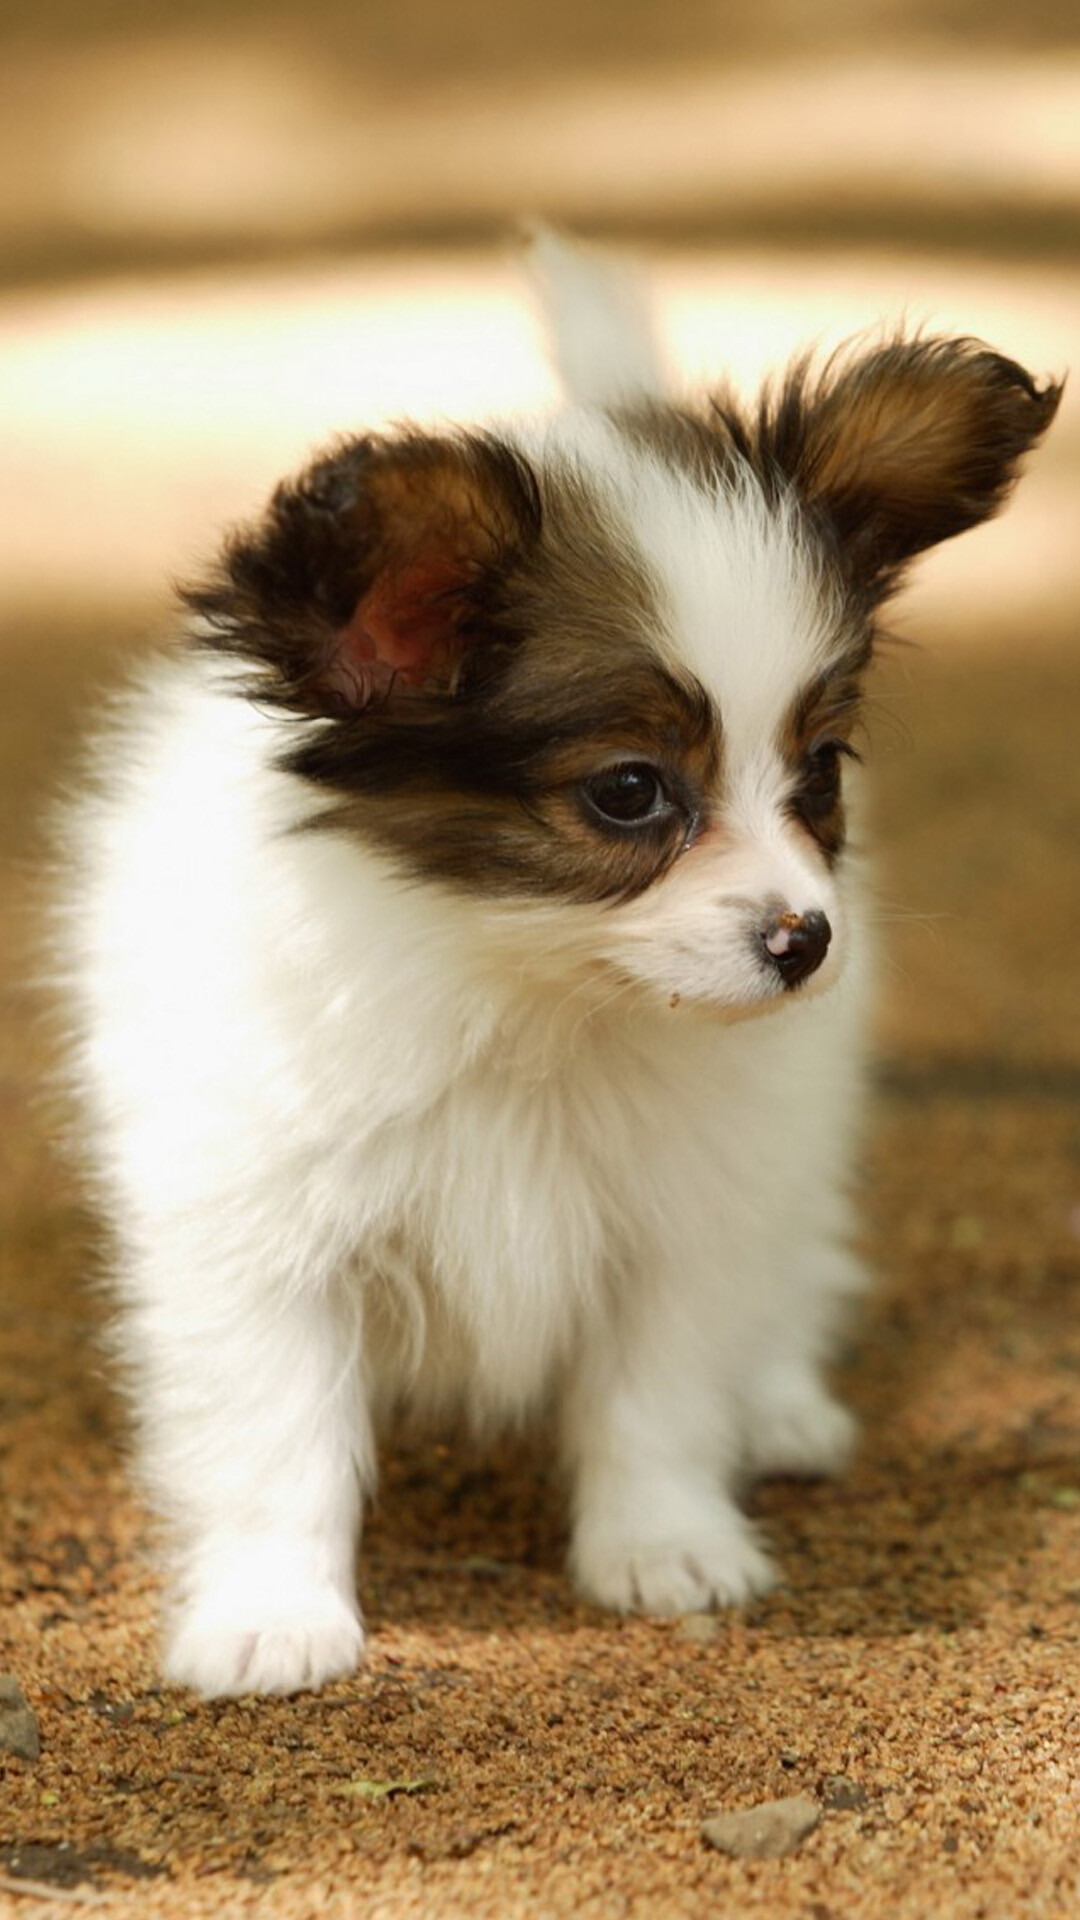 Puppy: The family Canidae, Pup, Canis familiaris. 1080x1920 Full HD Wallpaper.